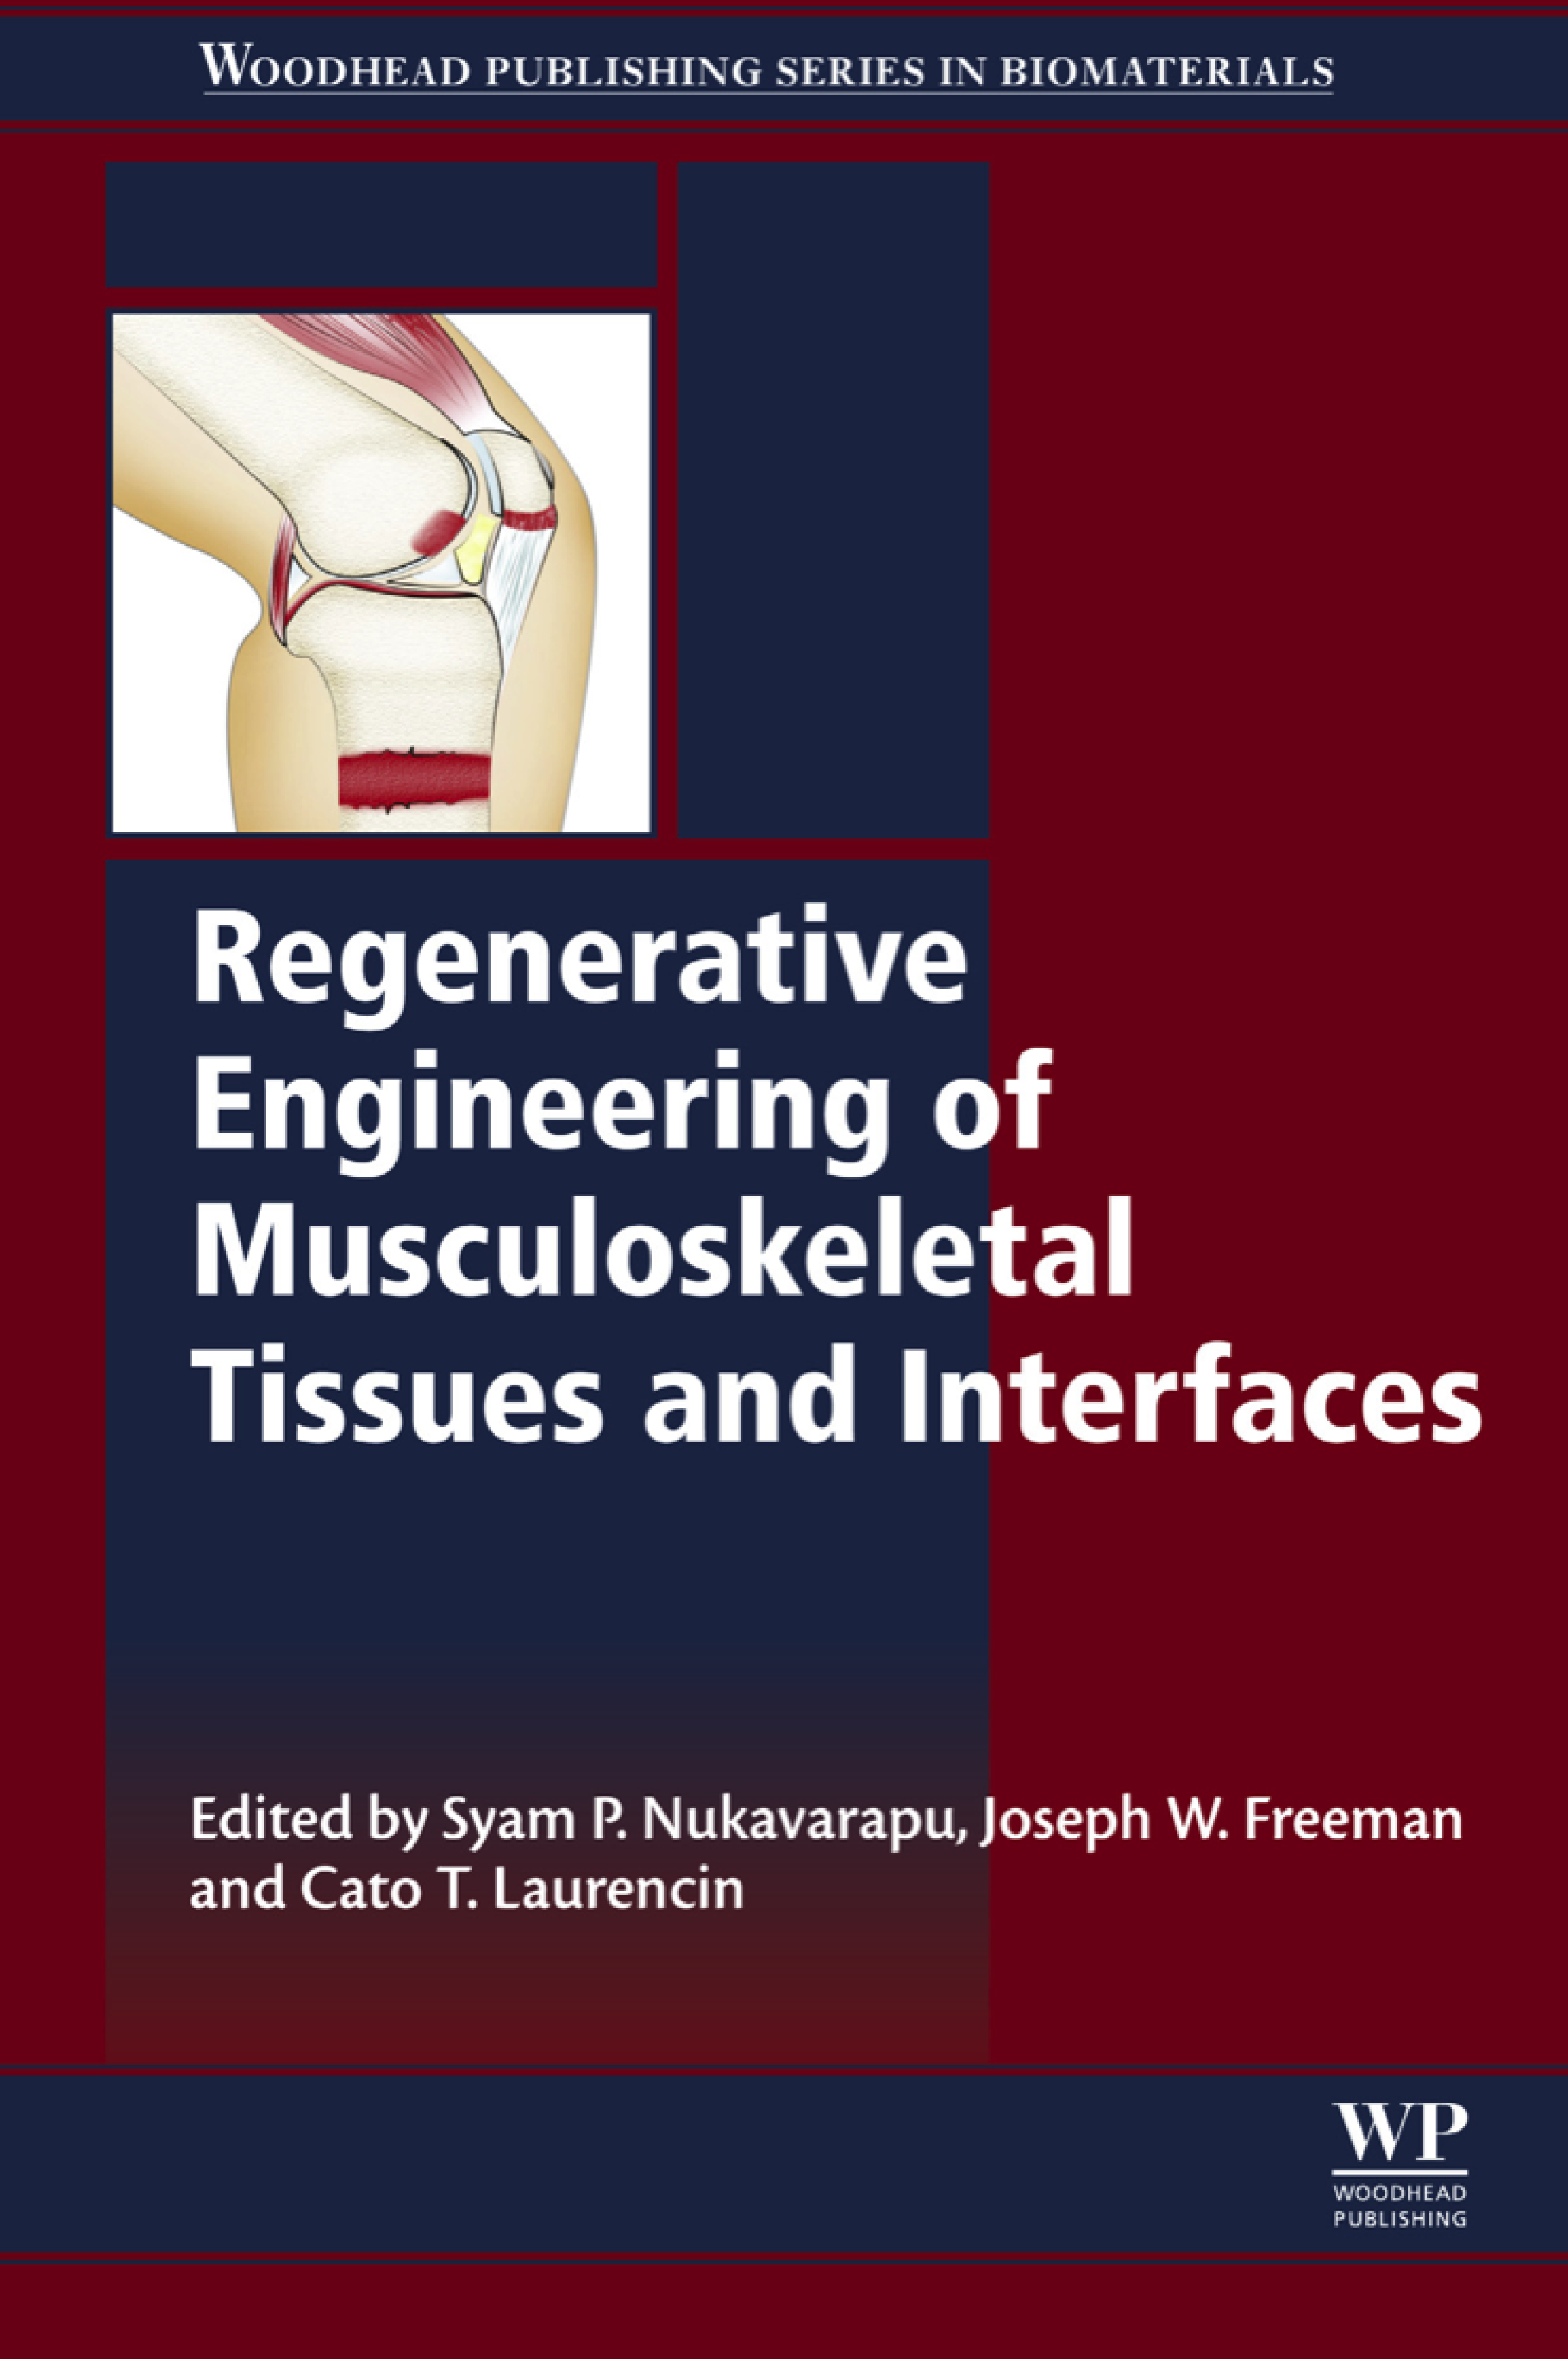  regenerative-engineering-of-musculoskeletal-tissues-and-interfaces